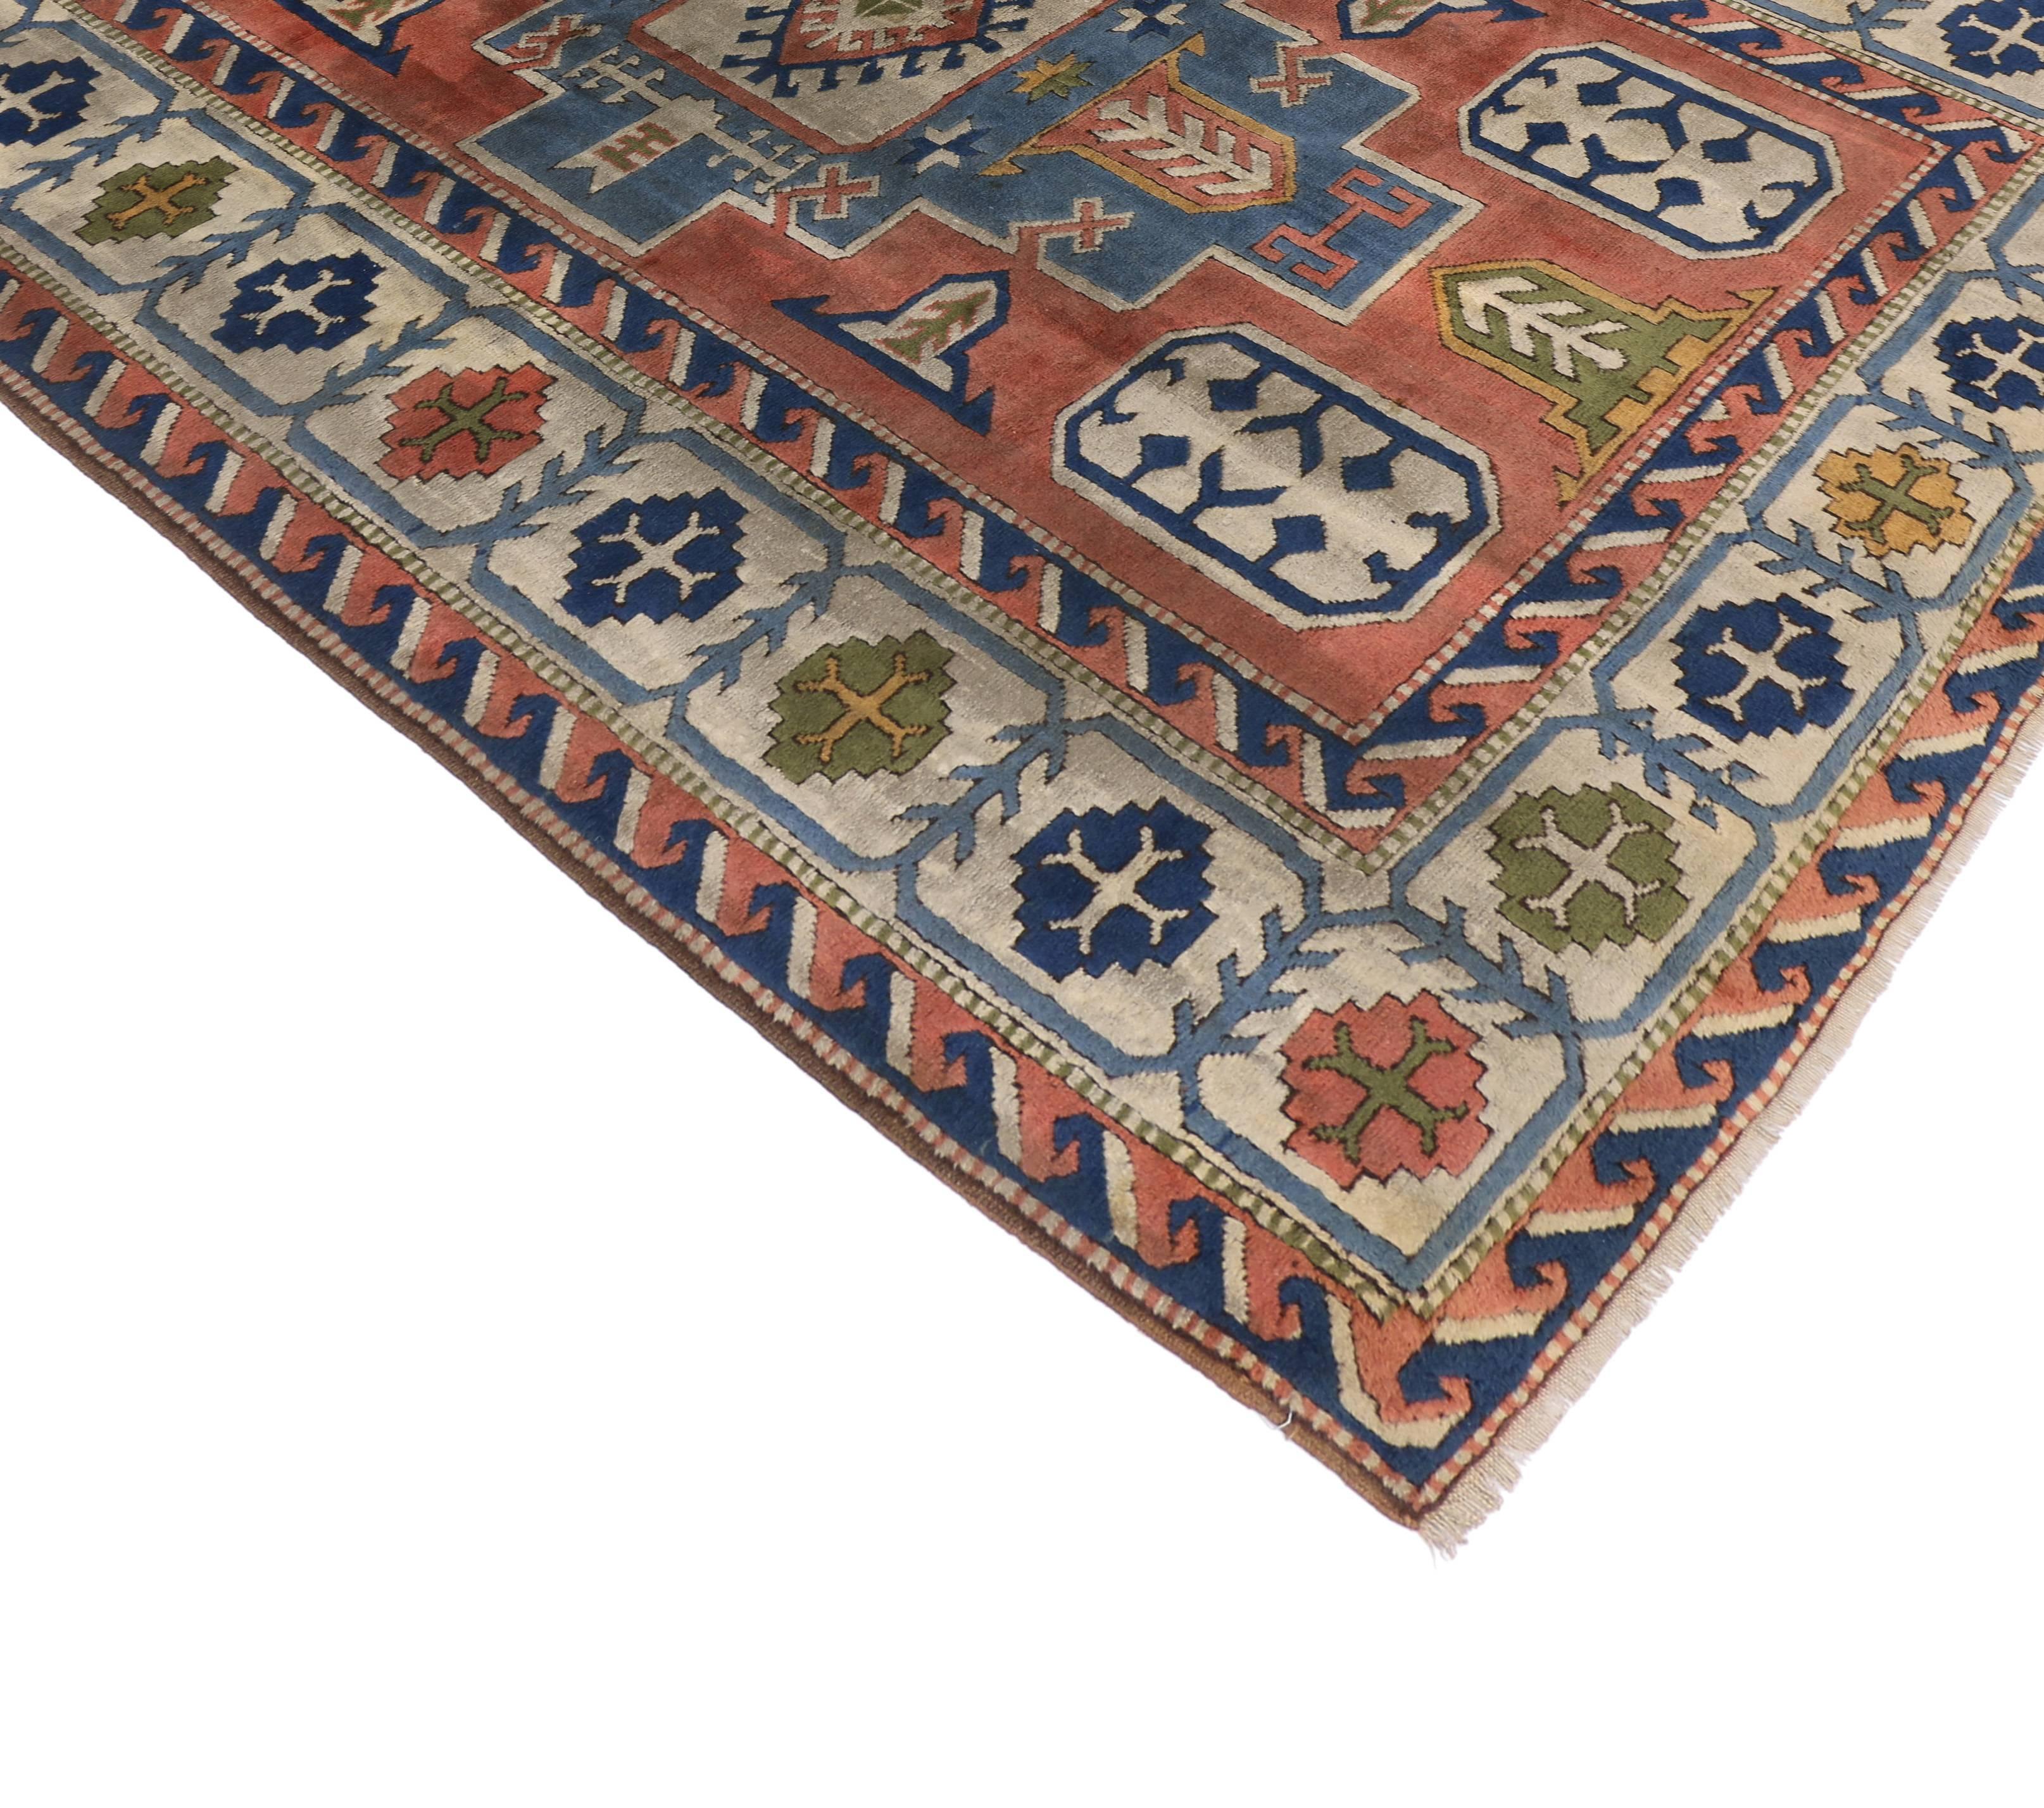 74752, vintage Turkish Oushak area rug. This hand-knotted wool vintage Turkish Oushak rug with tribal style features a central amulet with a Turkish gul on a sky blue field dotted with stars, arrows and Caucasian style tribal symbols. The large